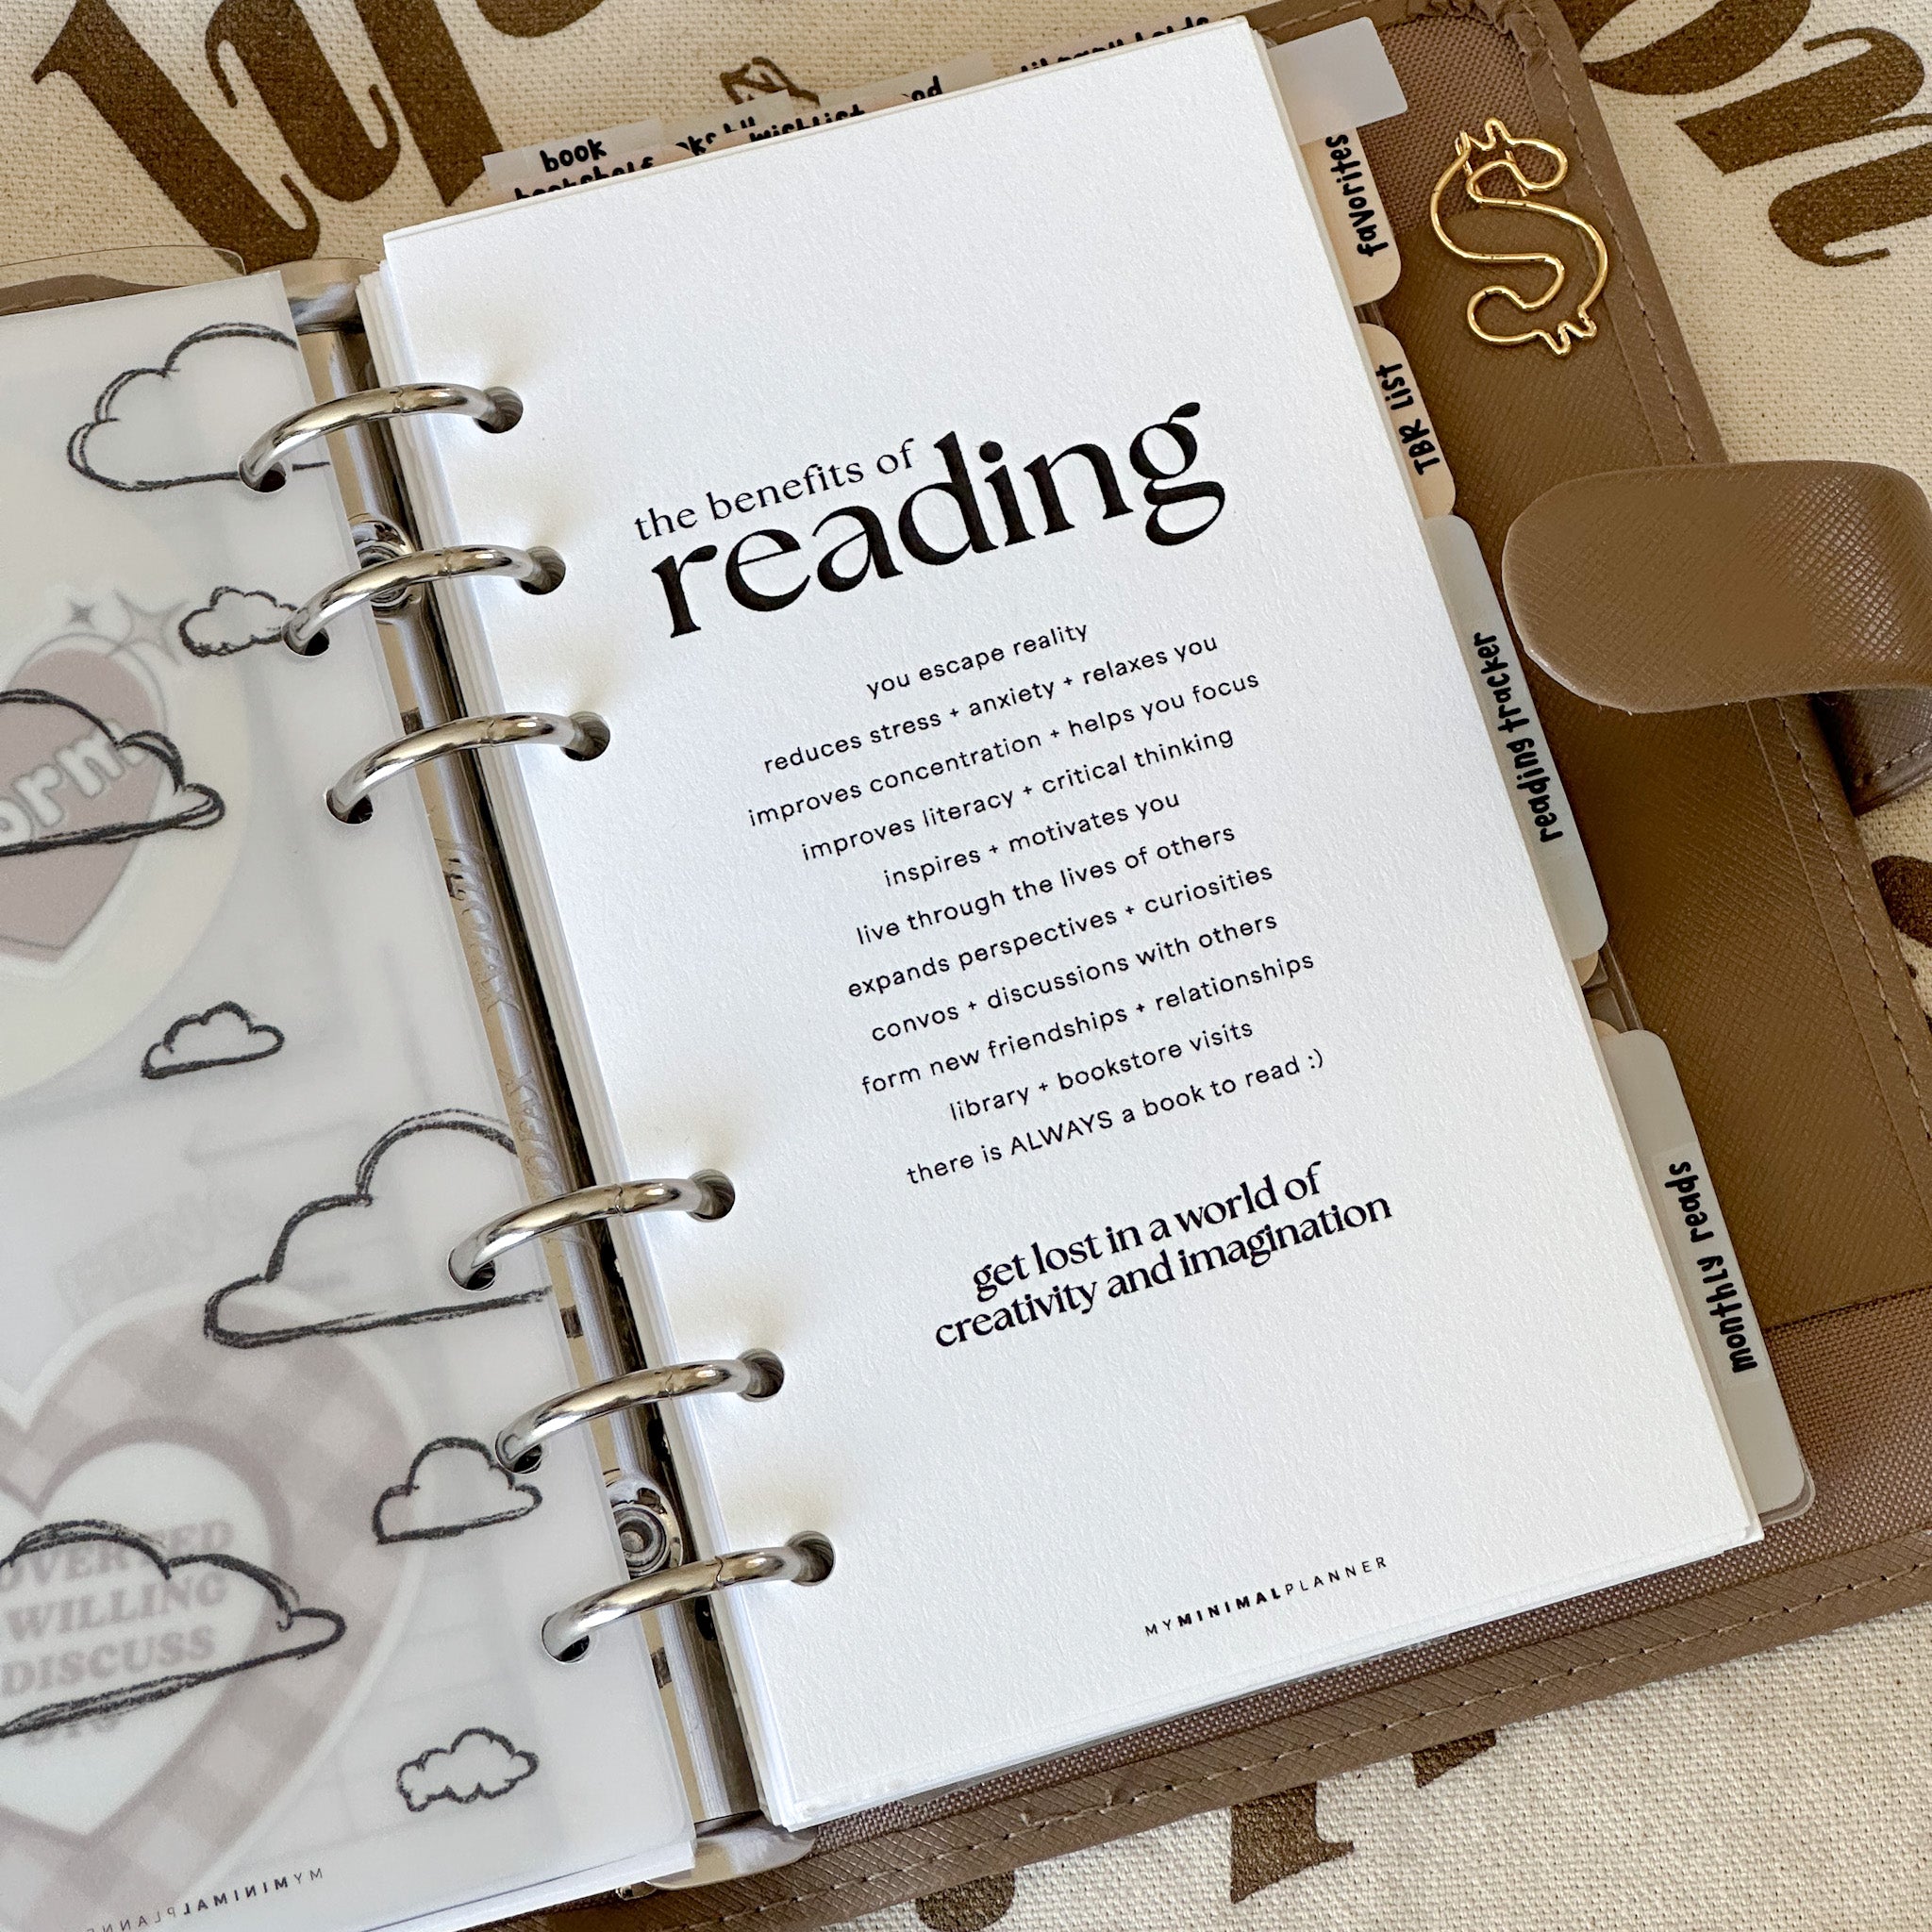 PRD206 - Benefits of Reading - Printable Dashboard